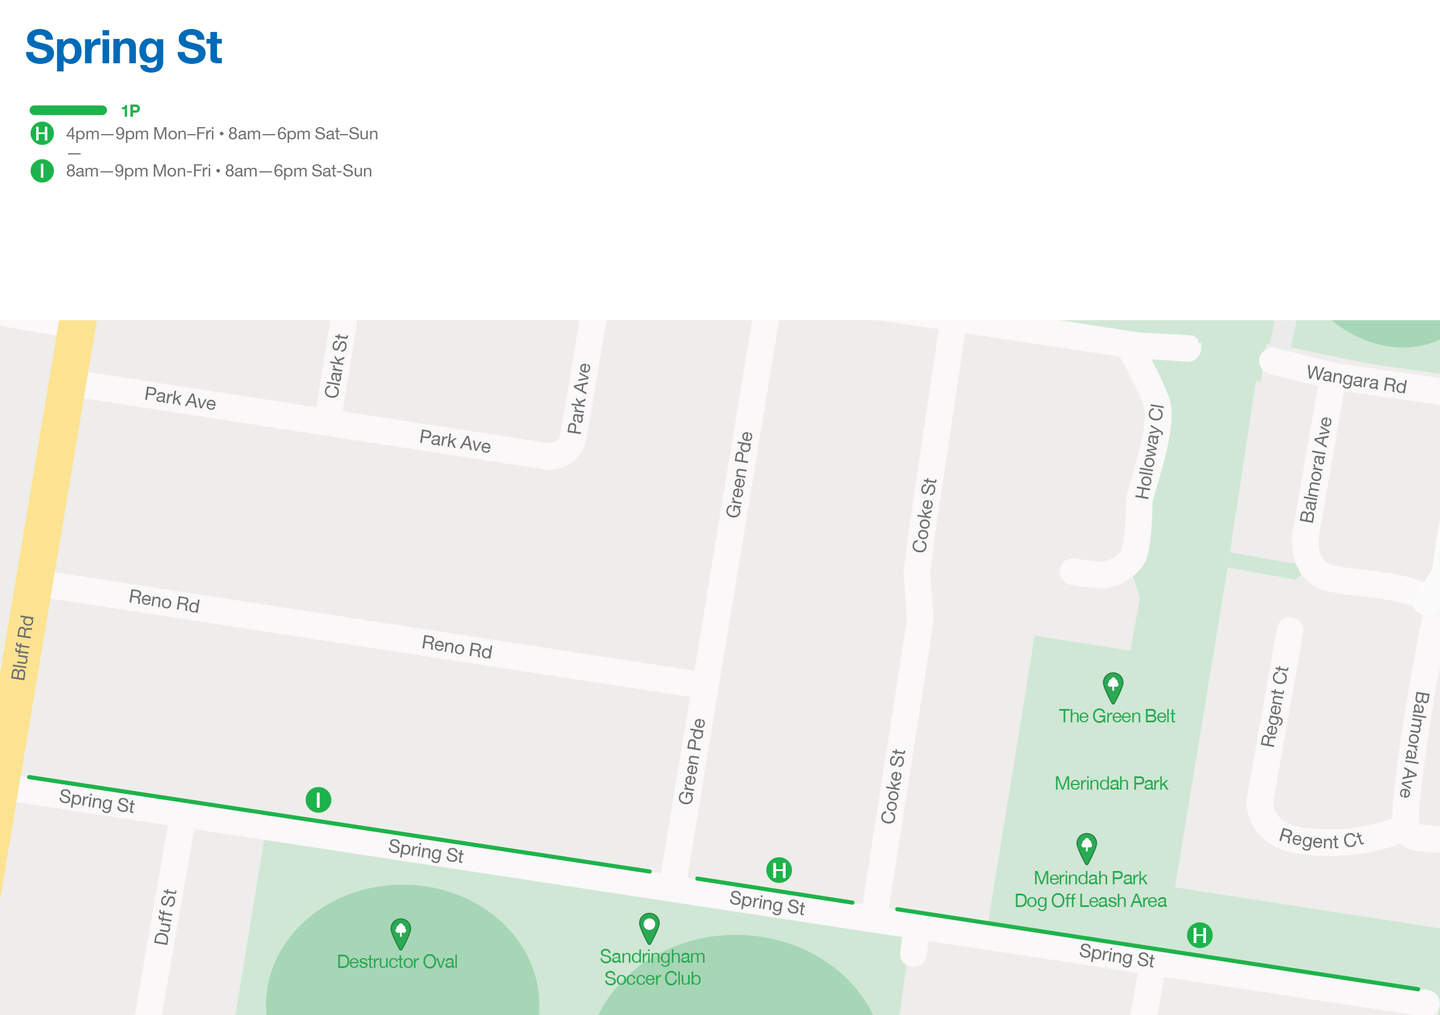 Netball Centre parking restrictions on Spring Street